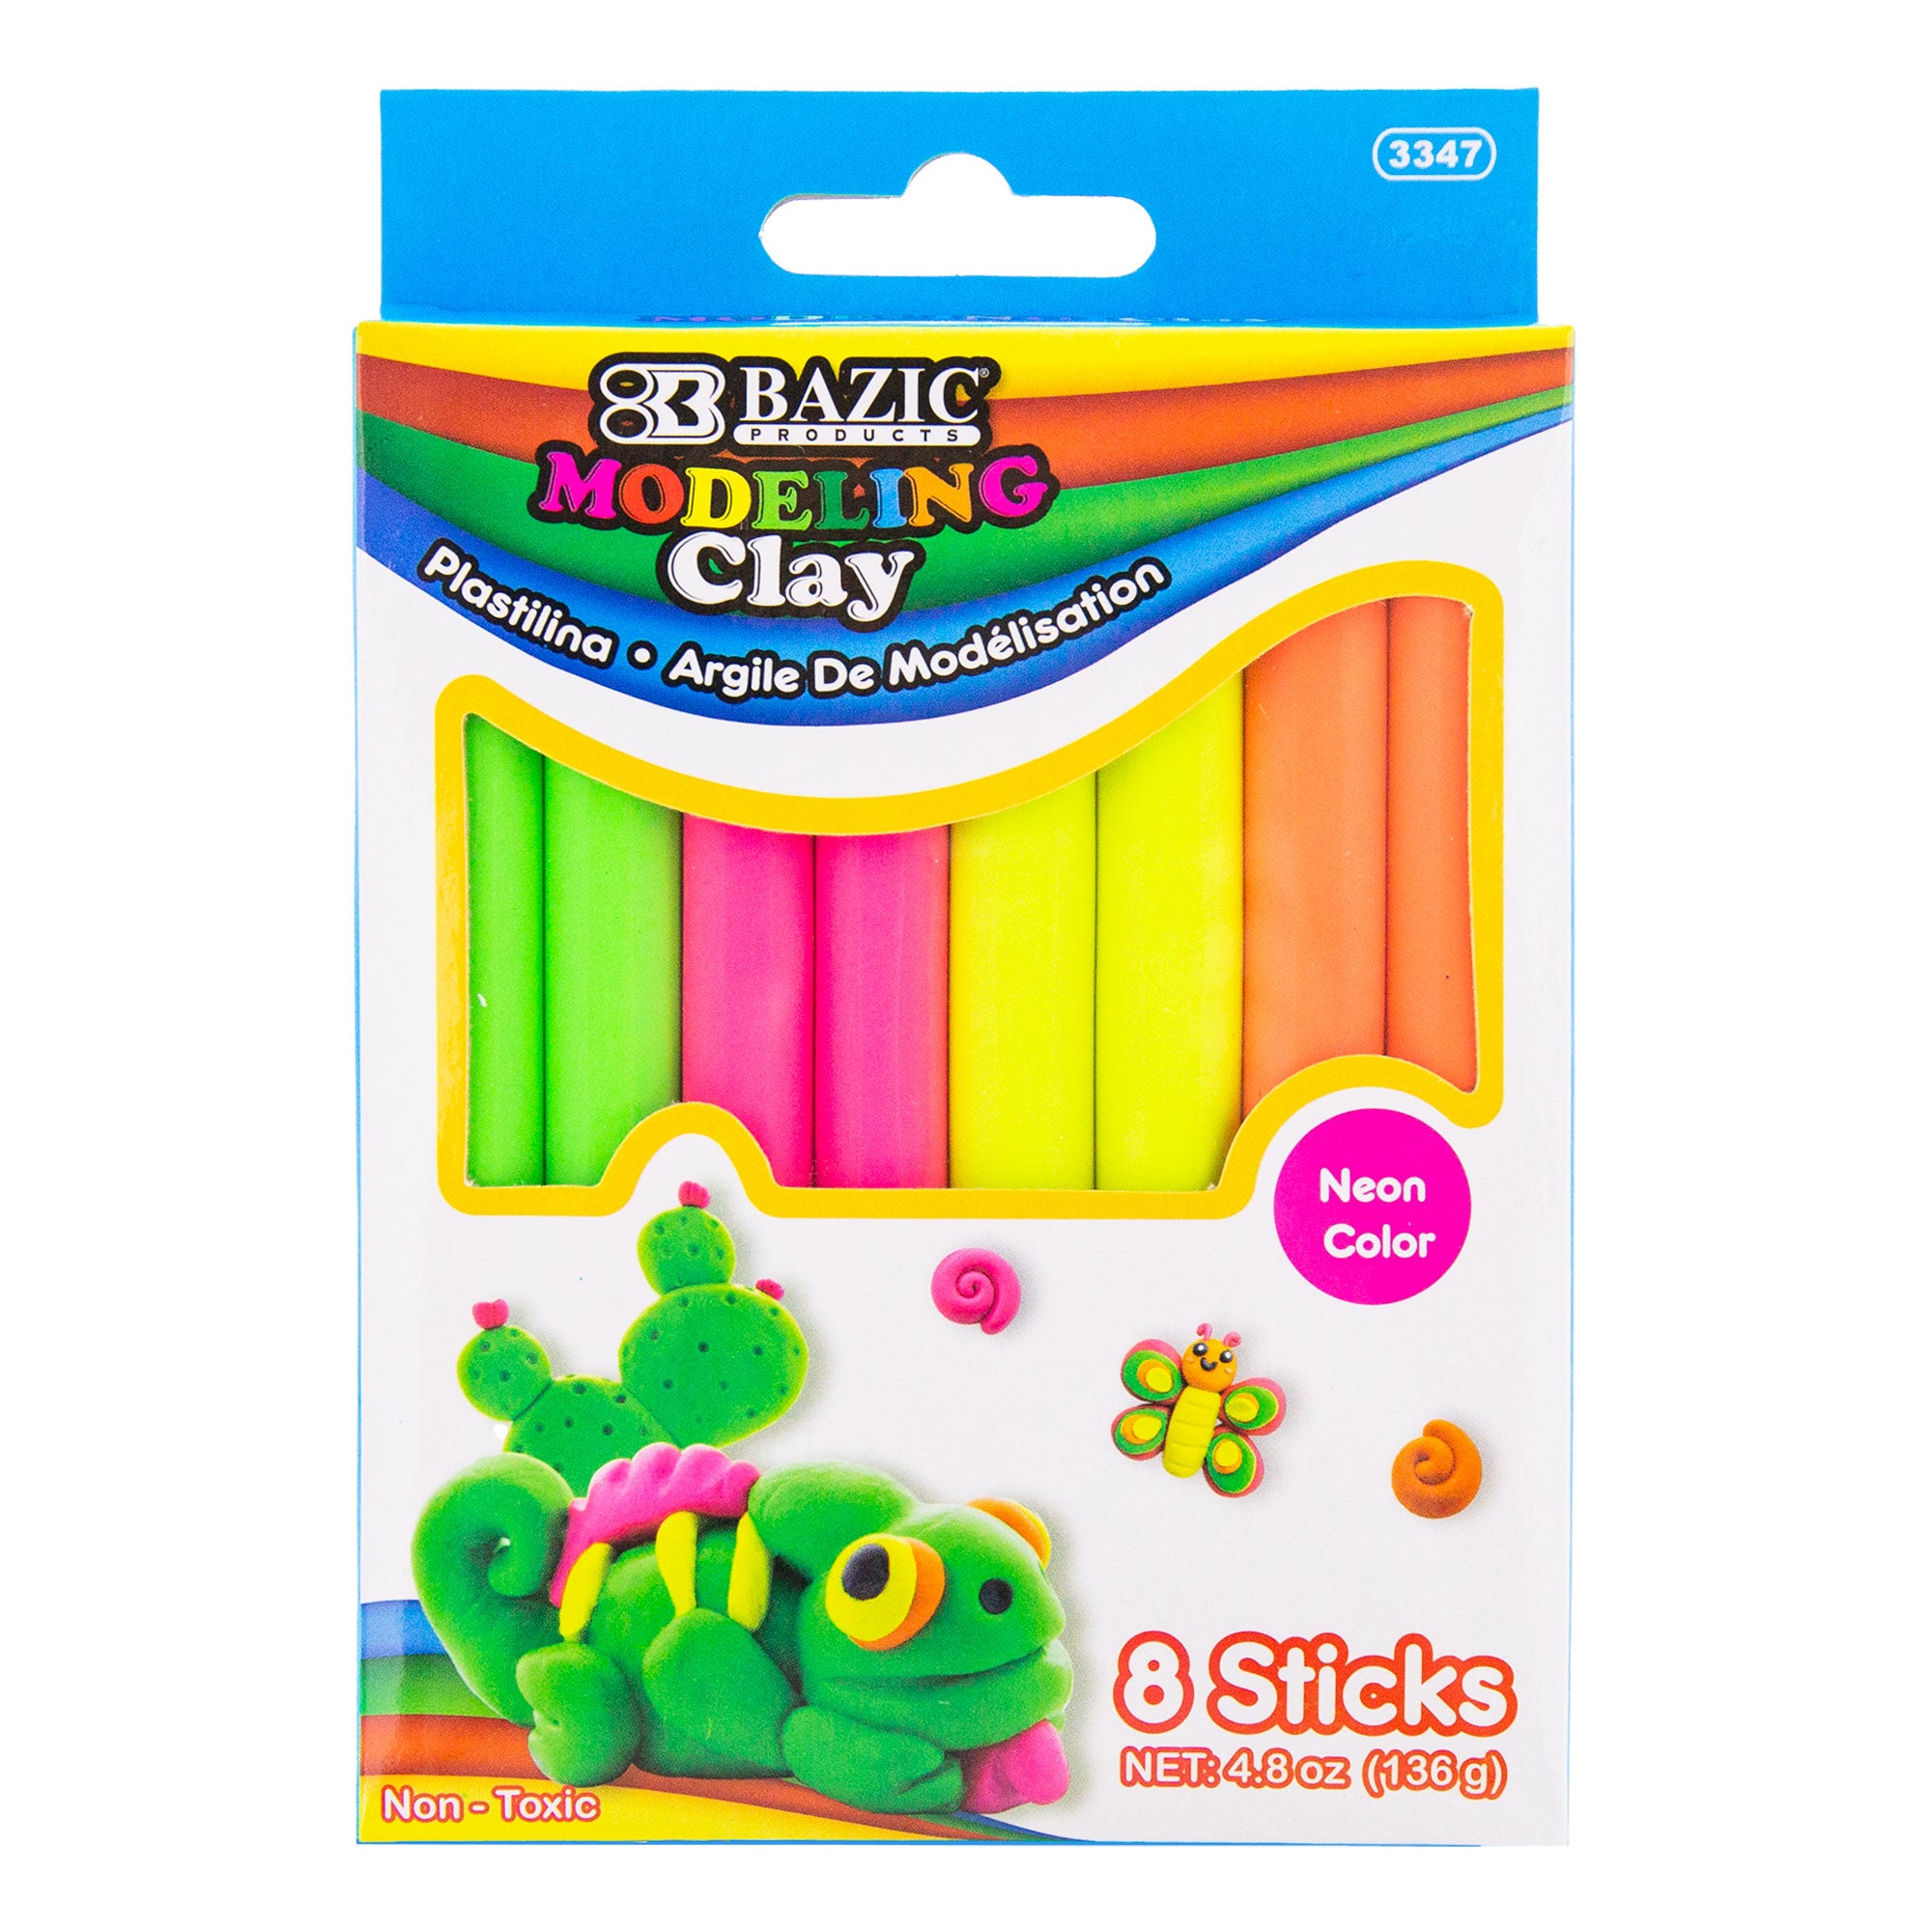 16 Piece Clay And Dough Modeling Tools Kit For Kids Play- Plastic Dough  Rollers Molds Cutters Animal Shapes-Fun Modeling Clay Dough Playset For  Children